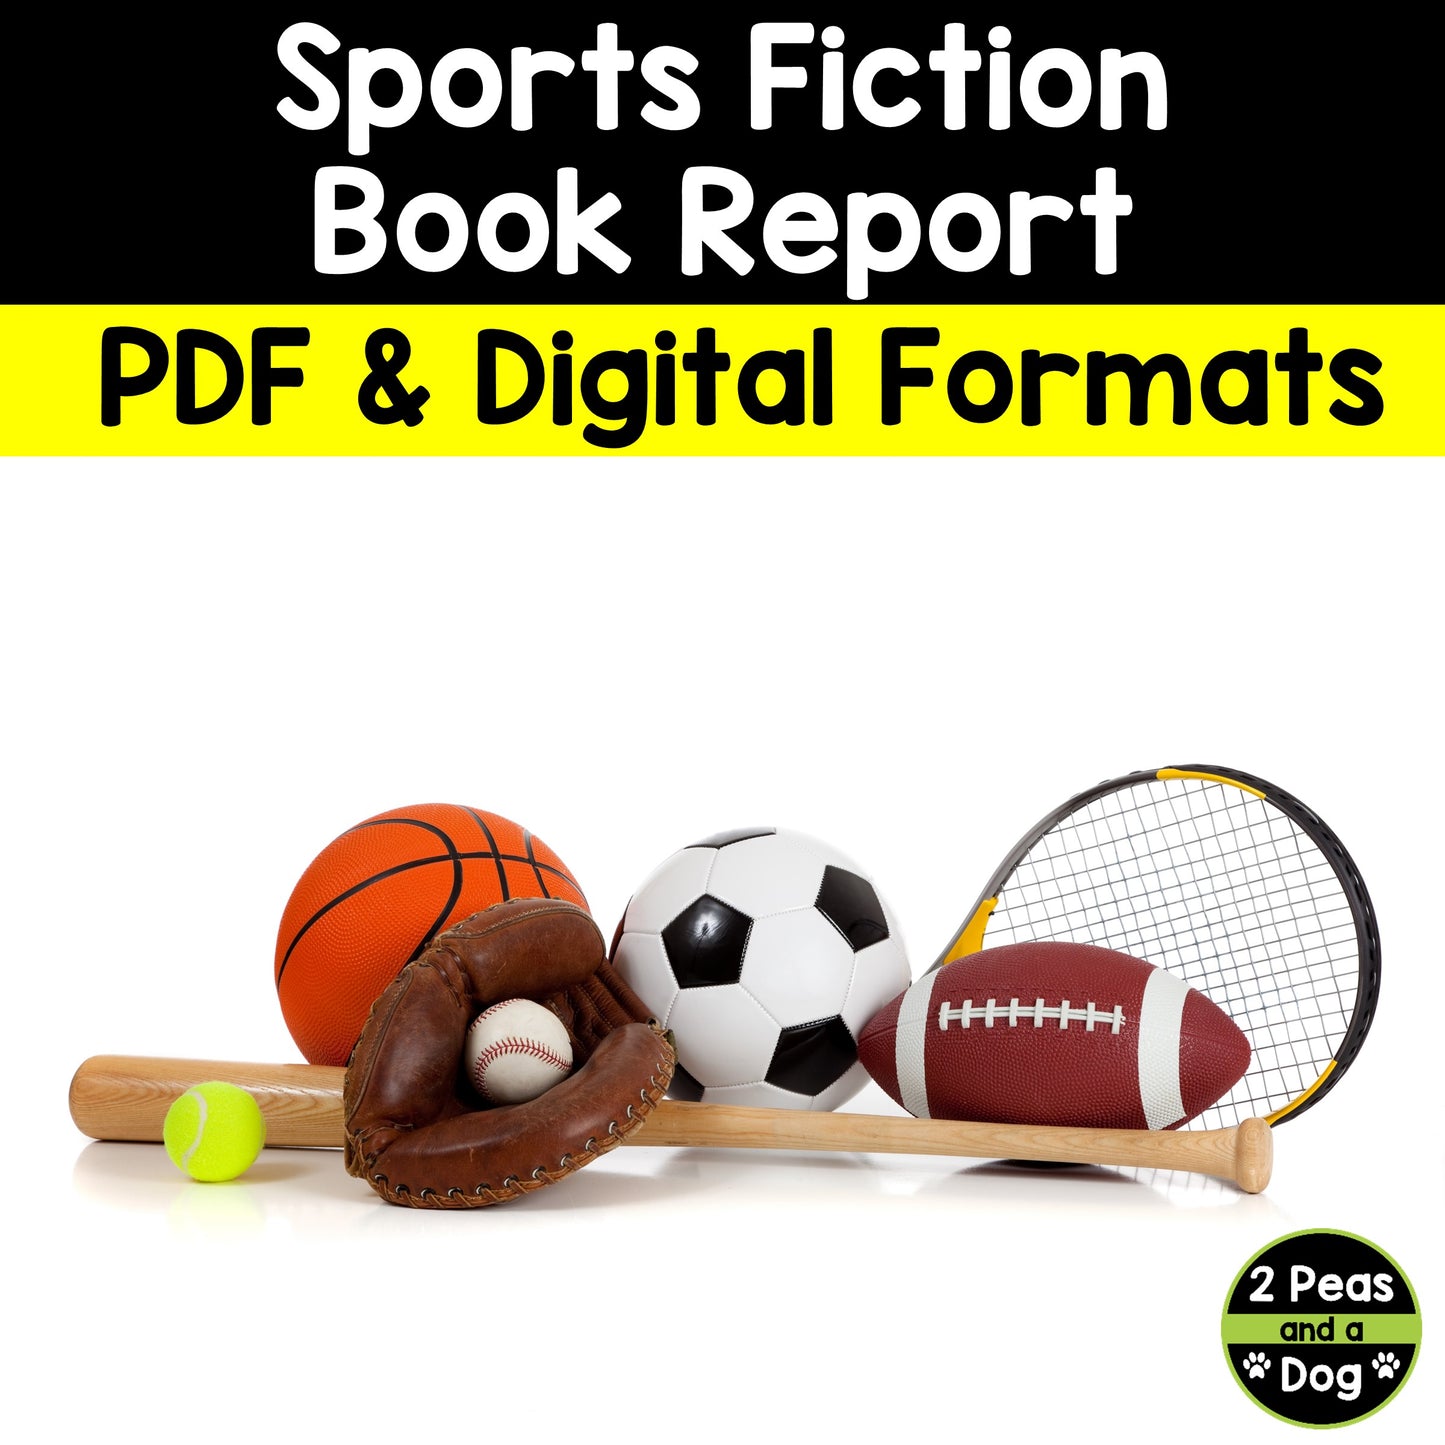 Sports Fiction Book Report